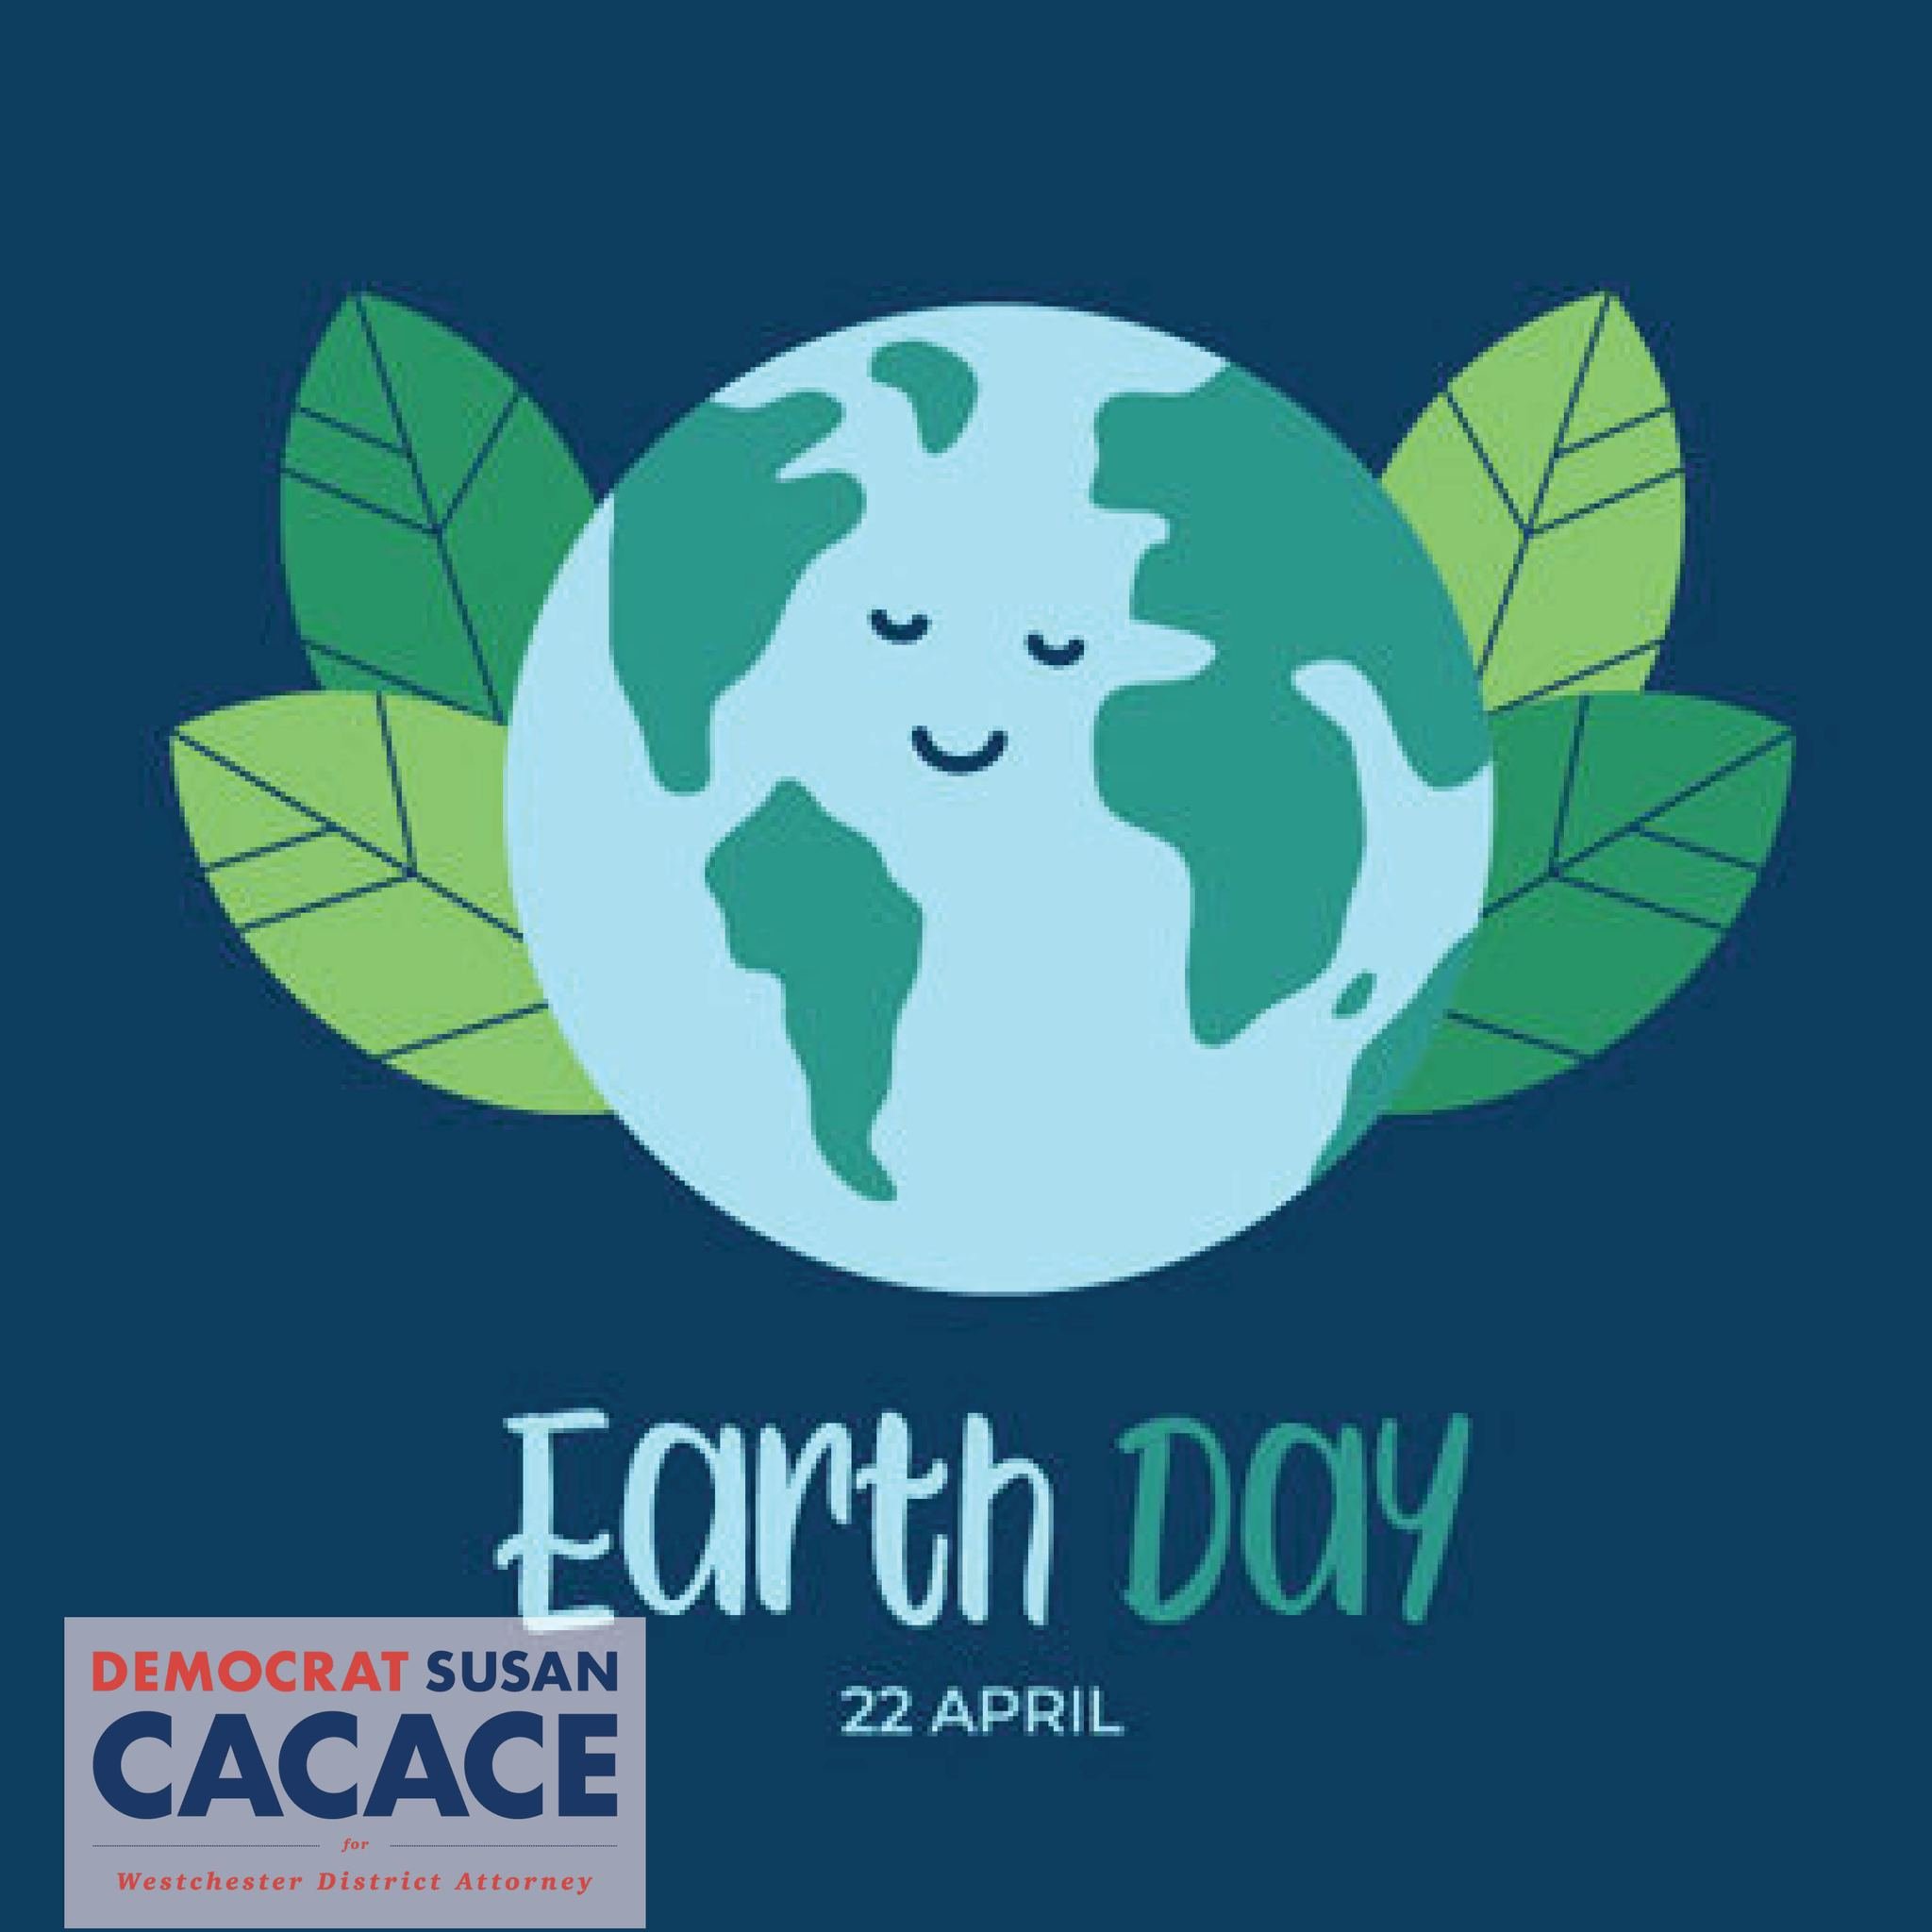 Today is Earth Day, a day for all of us to recommit to the planet.  As residents of this beautiful county, rich with natural resources and open spaces, it is our fundamental right to clean air and water. So often, communities of color and underserved